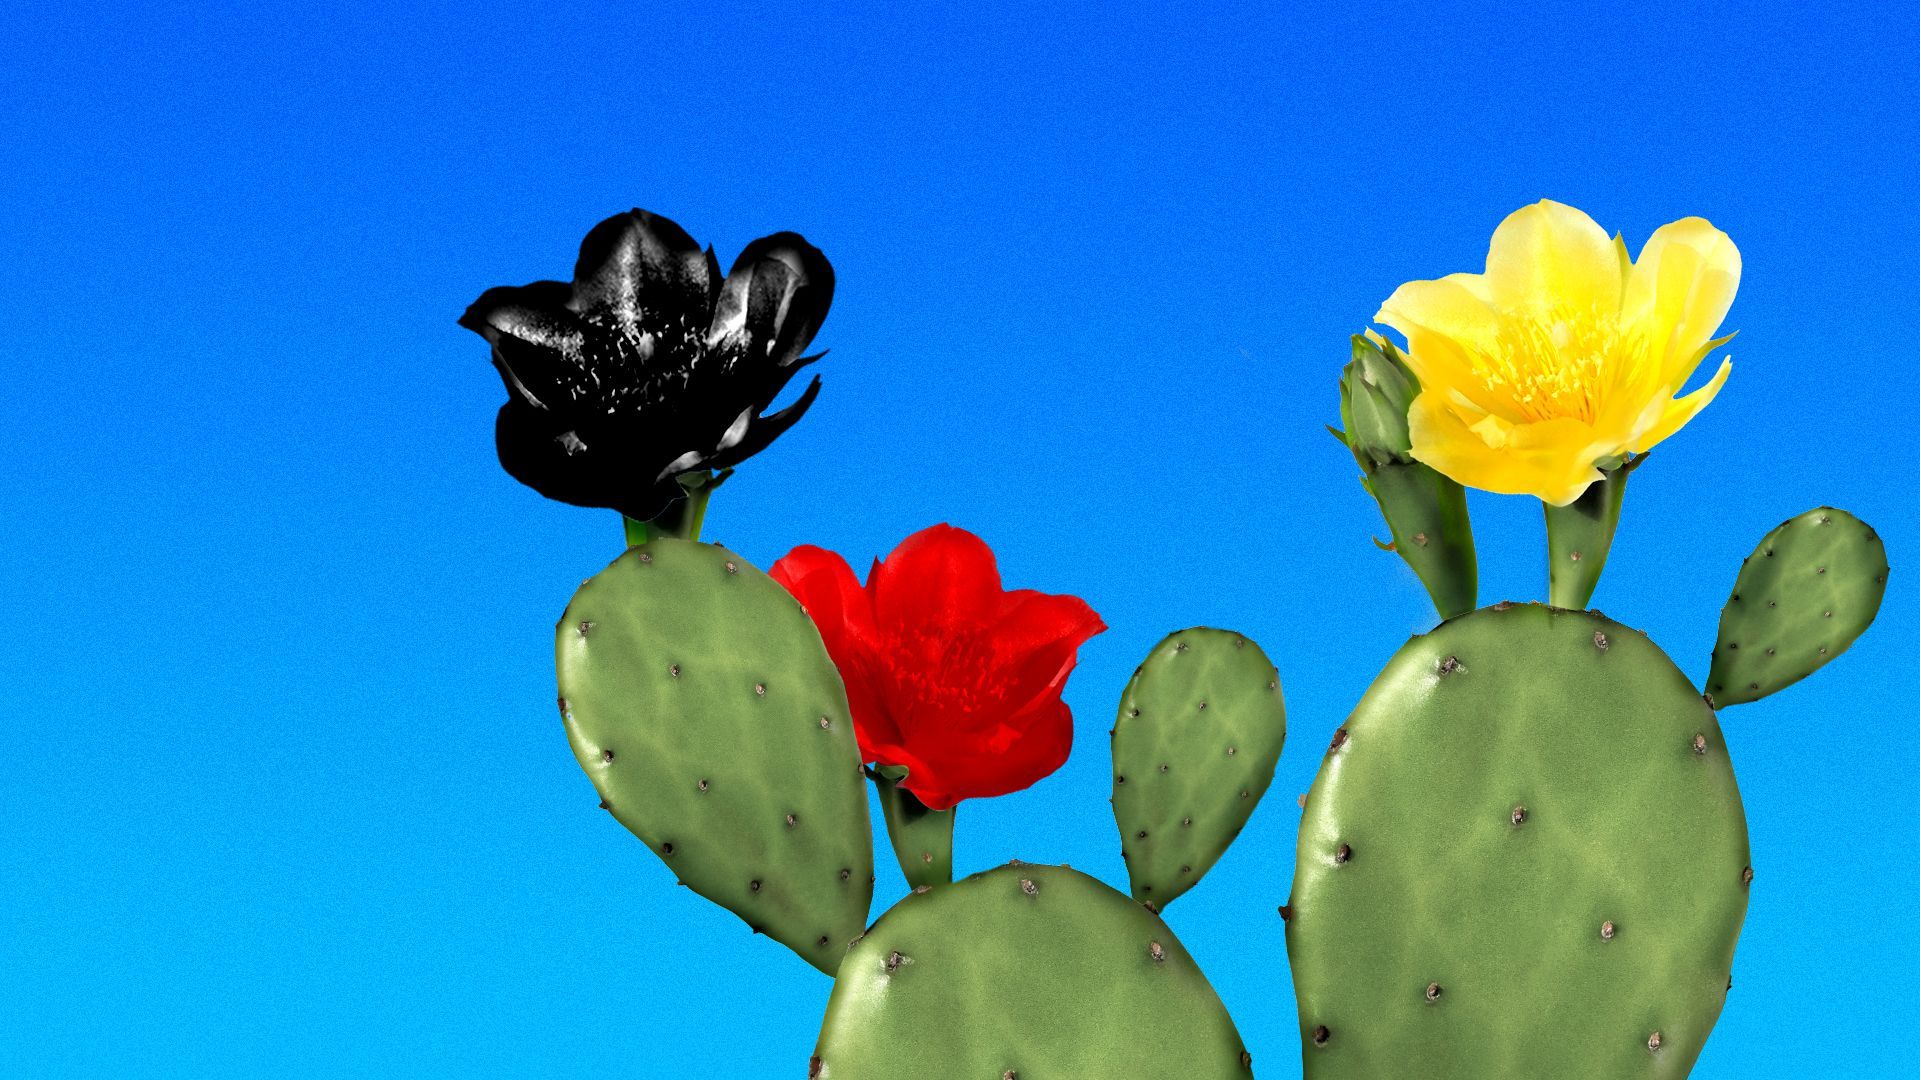 Illustration of a cactus with flowers in the shades of the German flag colors.